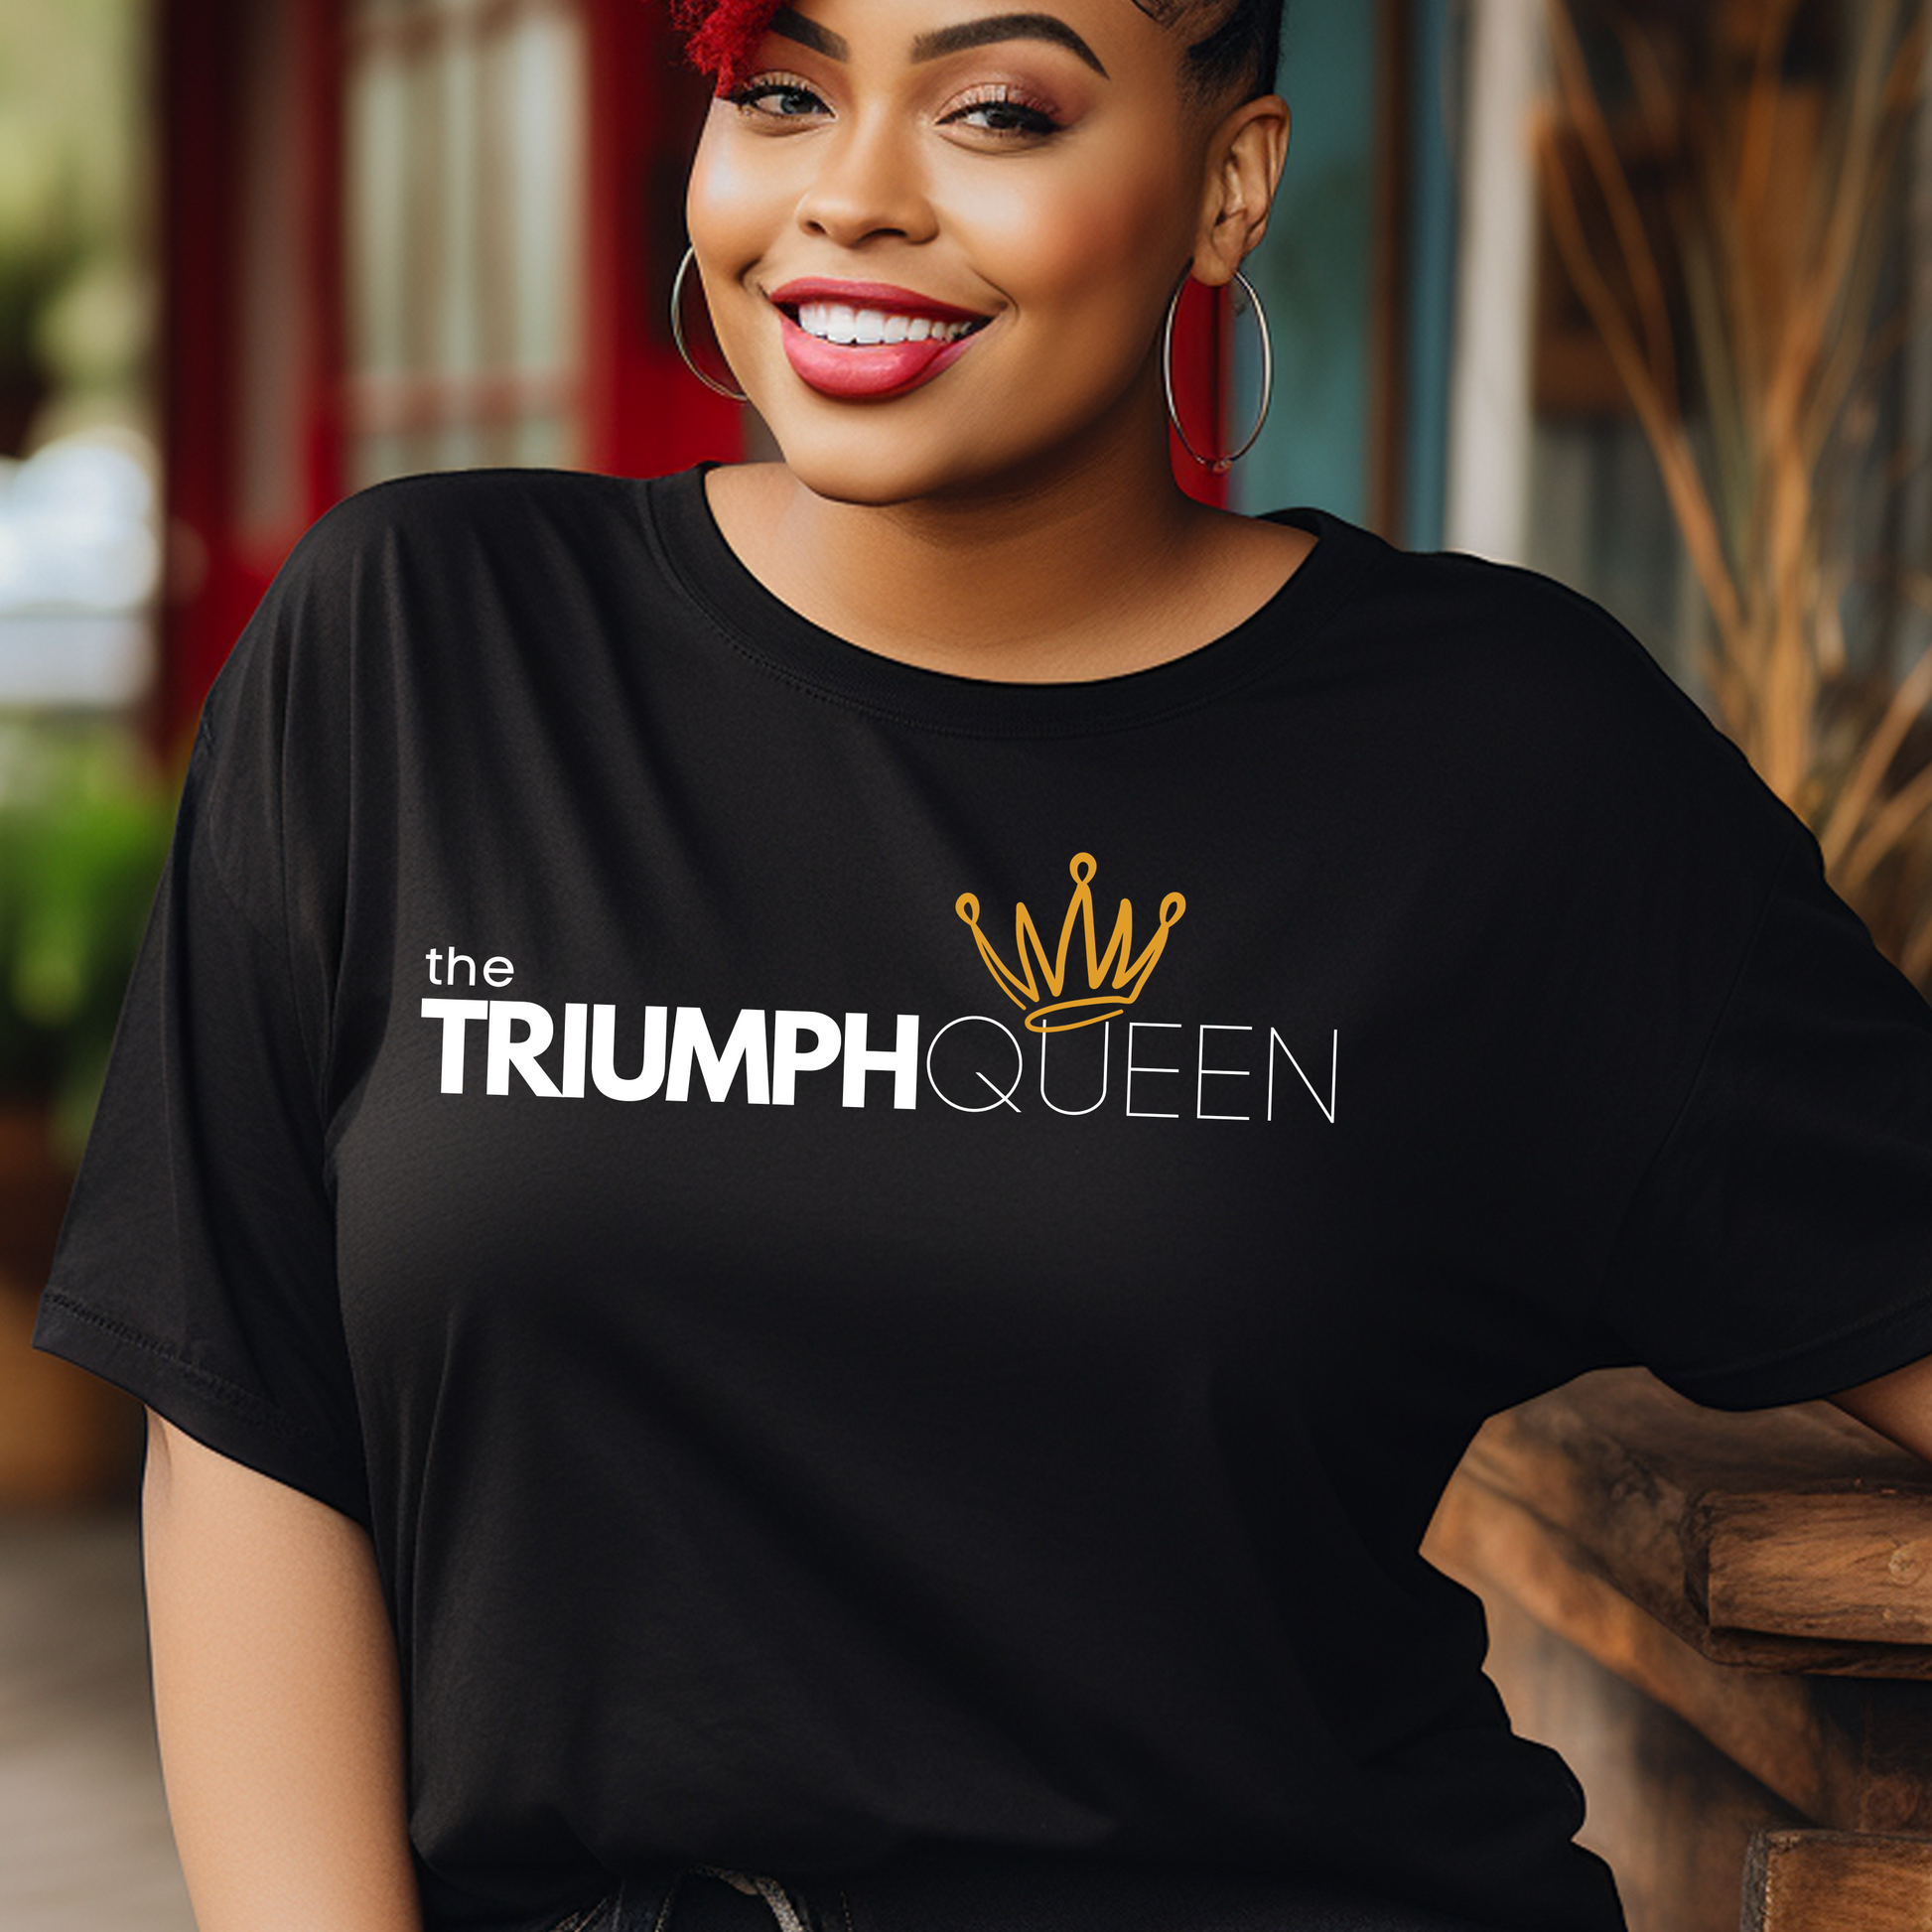 Black Triumph Queen T-shirt from Triumph Tees, a faith-based clothing brand. High-quality Christian t-shirt with a bold, white logo in the centre, symbolizing faith and empowerment. Ideal for those seeking stylish faith apparel.